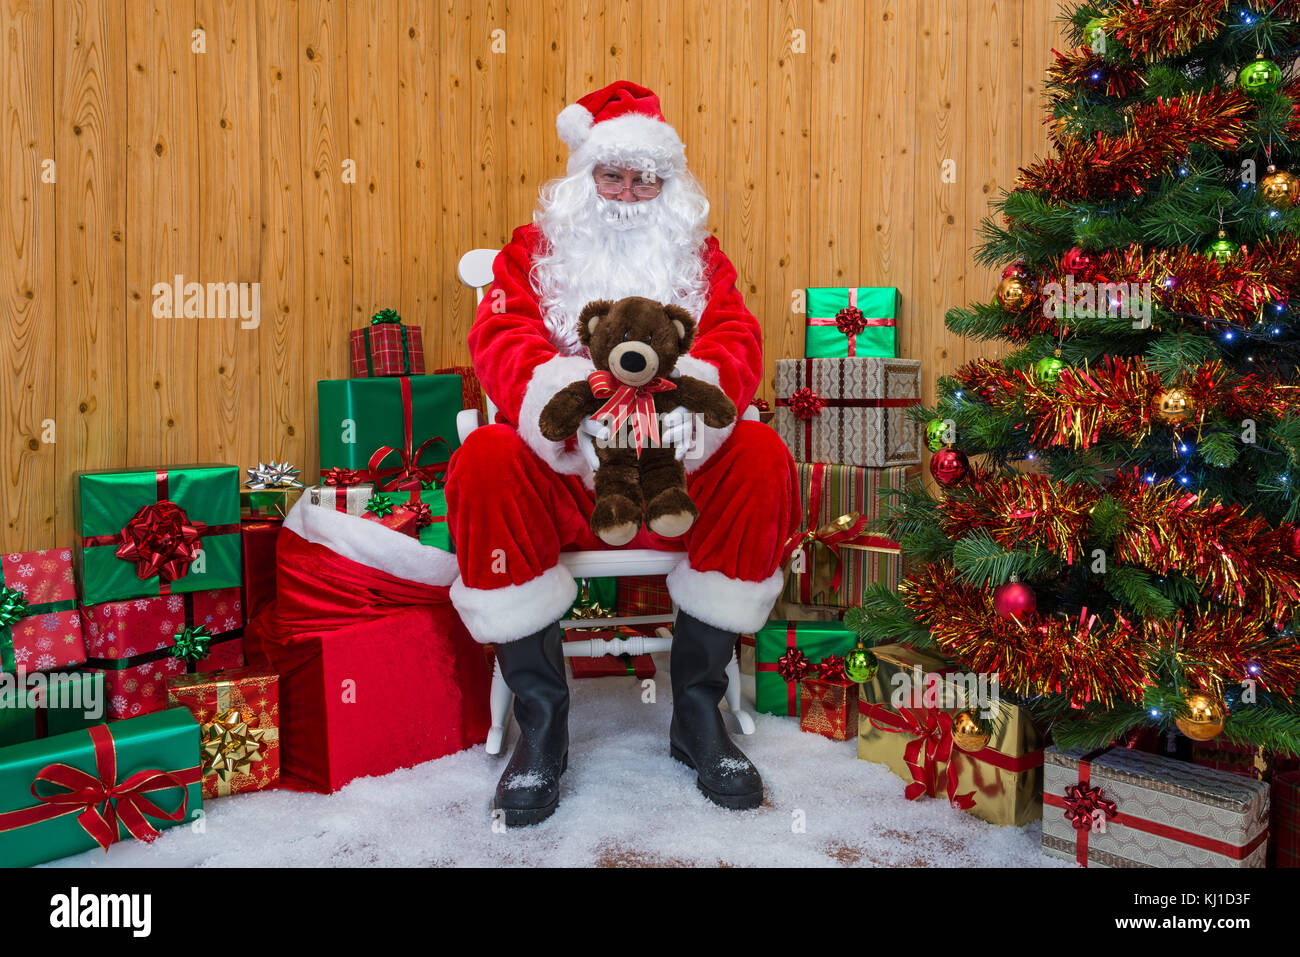 Santa Claus in his grotto surrounded by a Christmas tree with presents and gift wrapped boxes offering you a teddy bear. Stock Photo